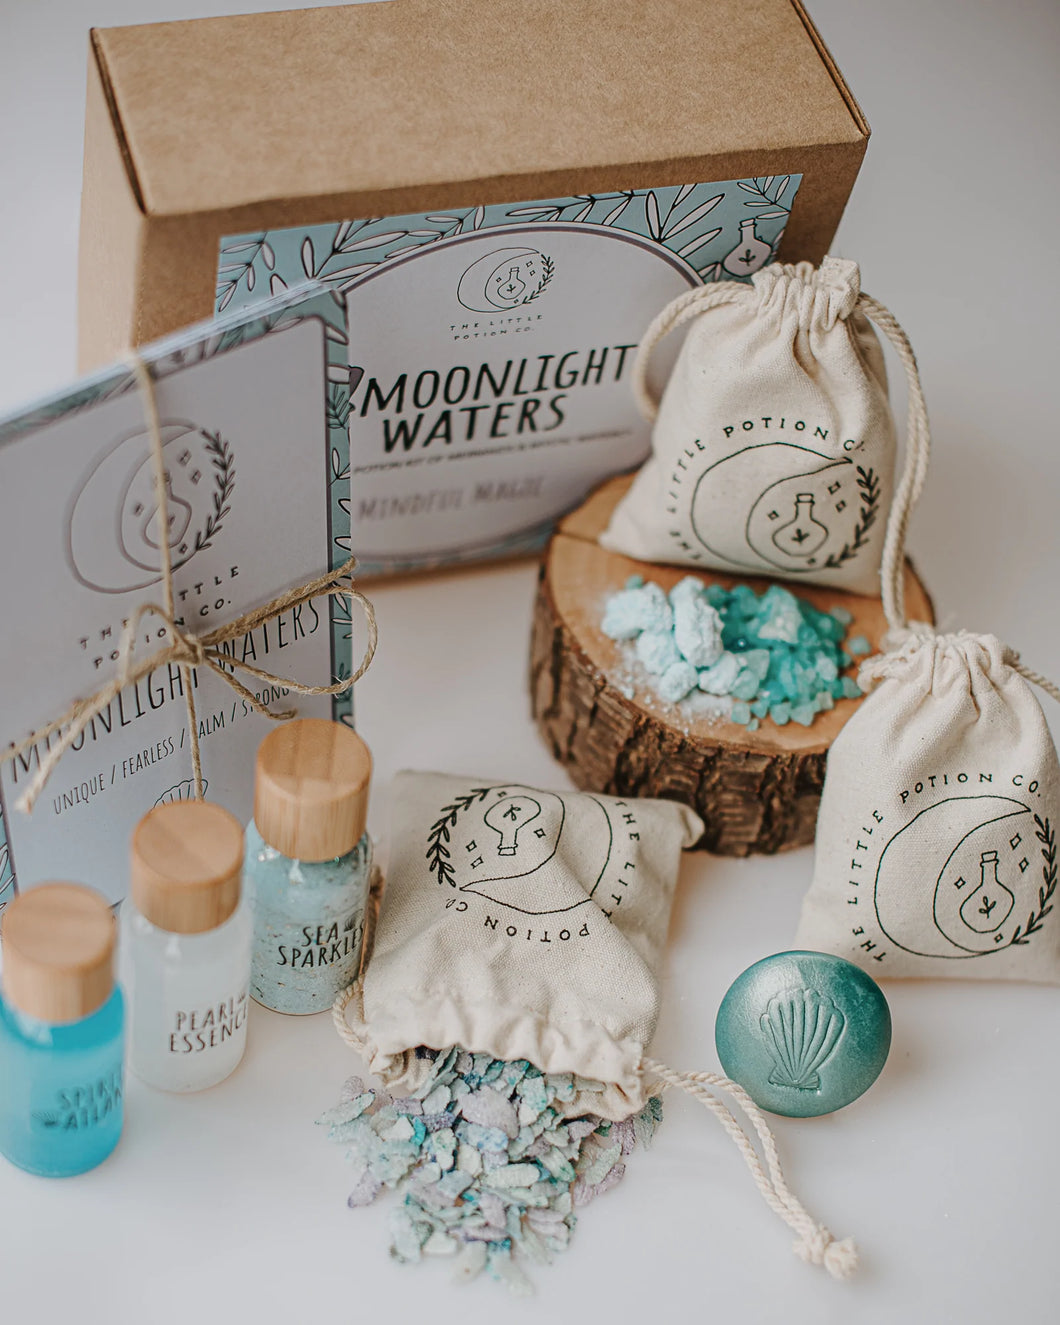 Moonlight Waters Mindful Potion Kit